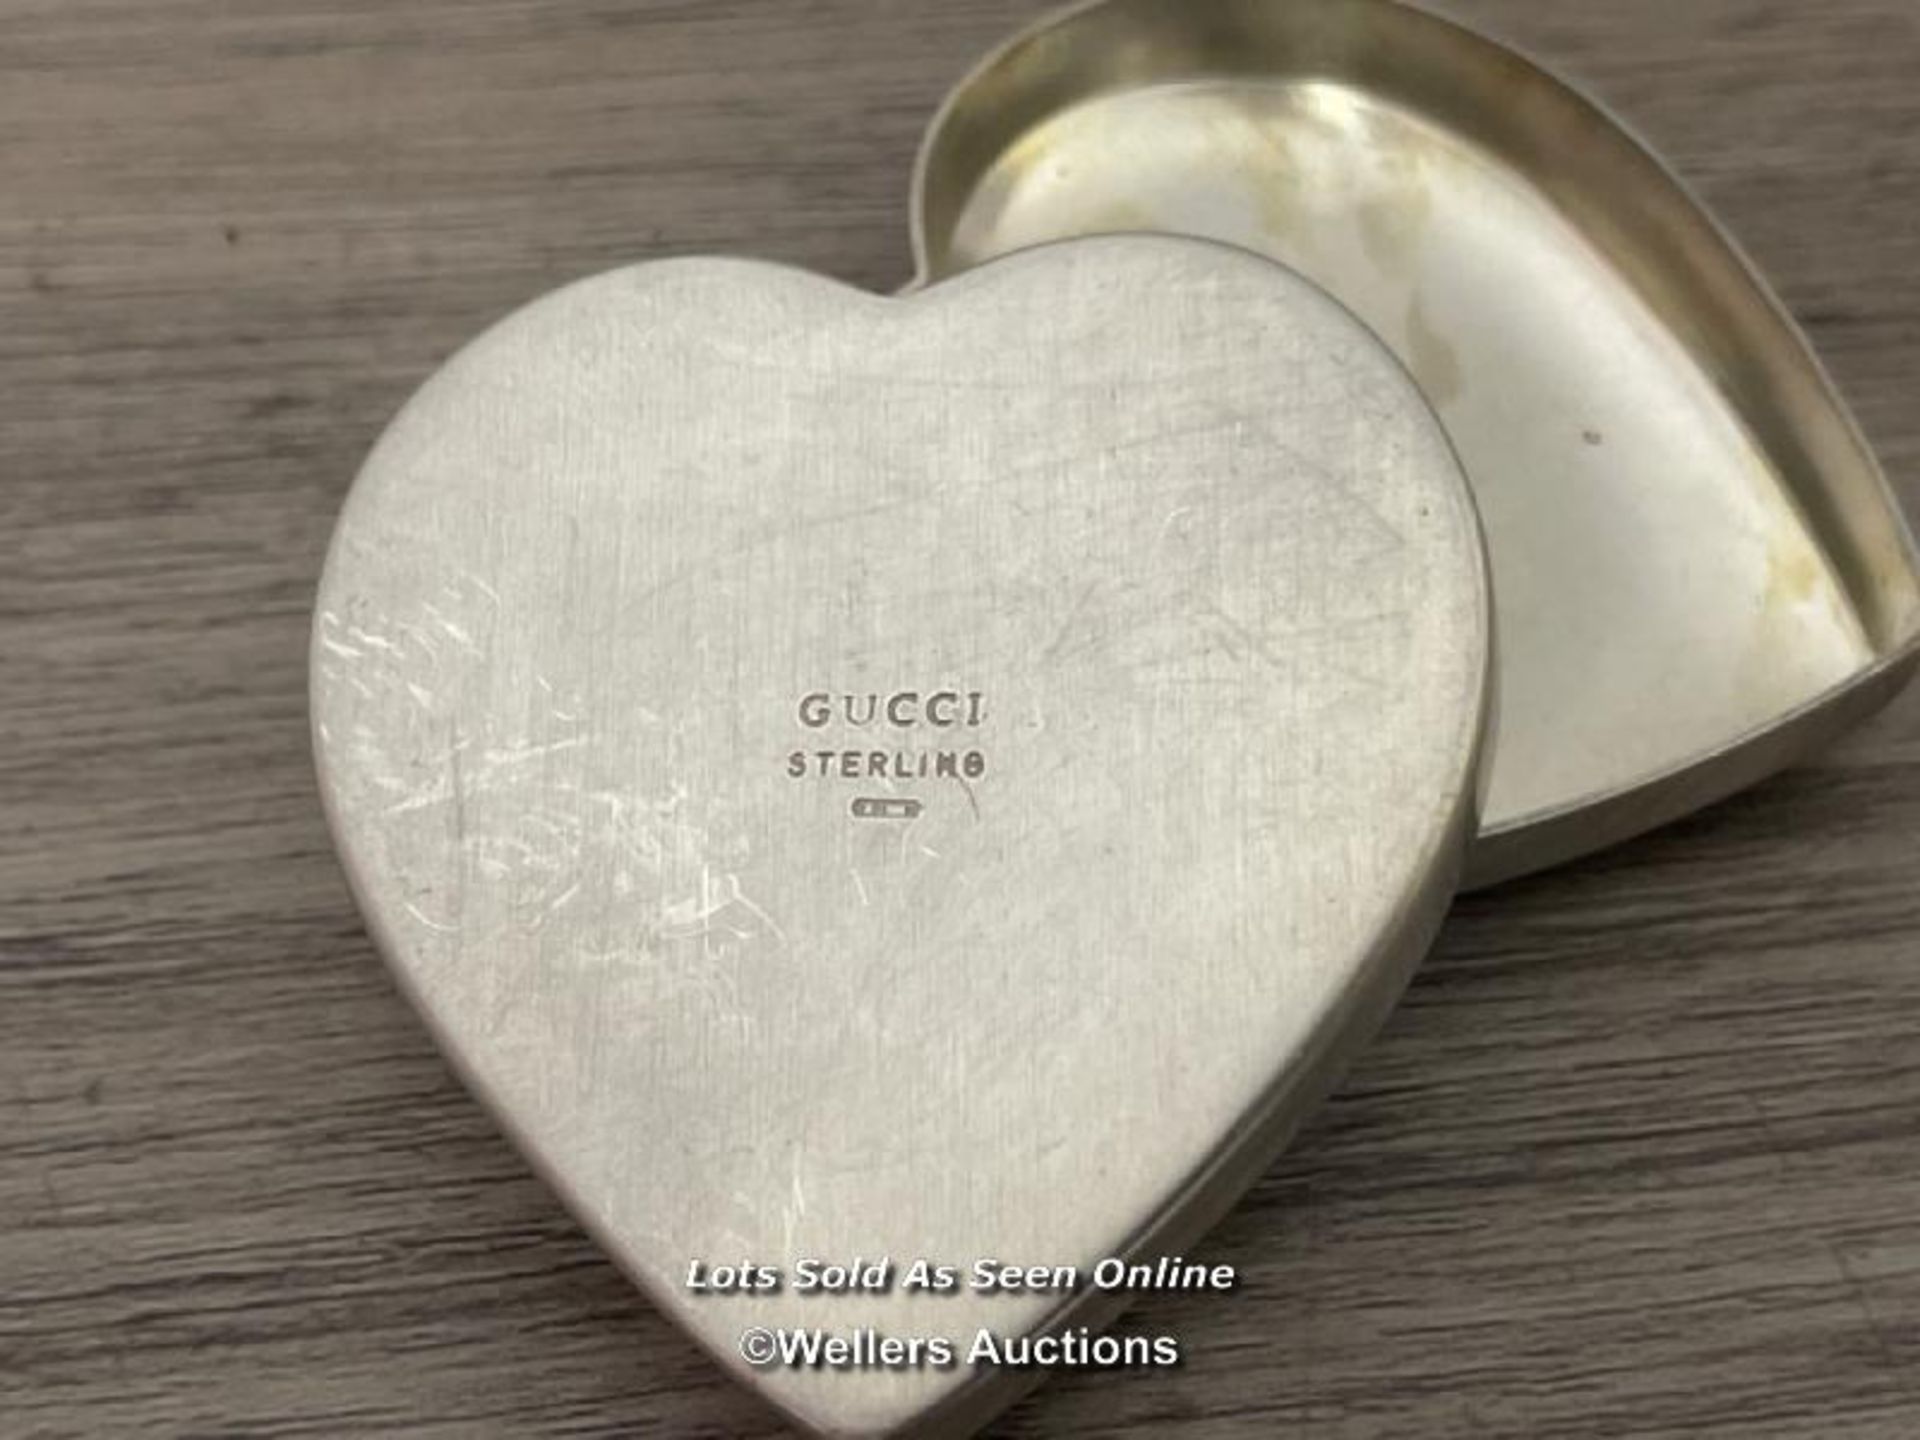 *VINTAGE GUCCI HEART SHAPED STERLING SILVER TRINKET BOX, 5 X 5.5CM, 34G - Image 2 of 2